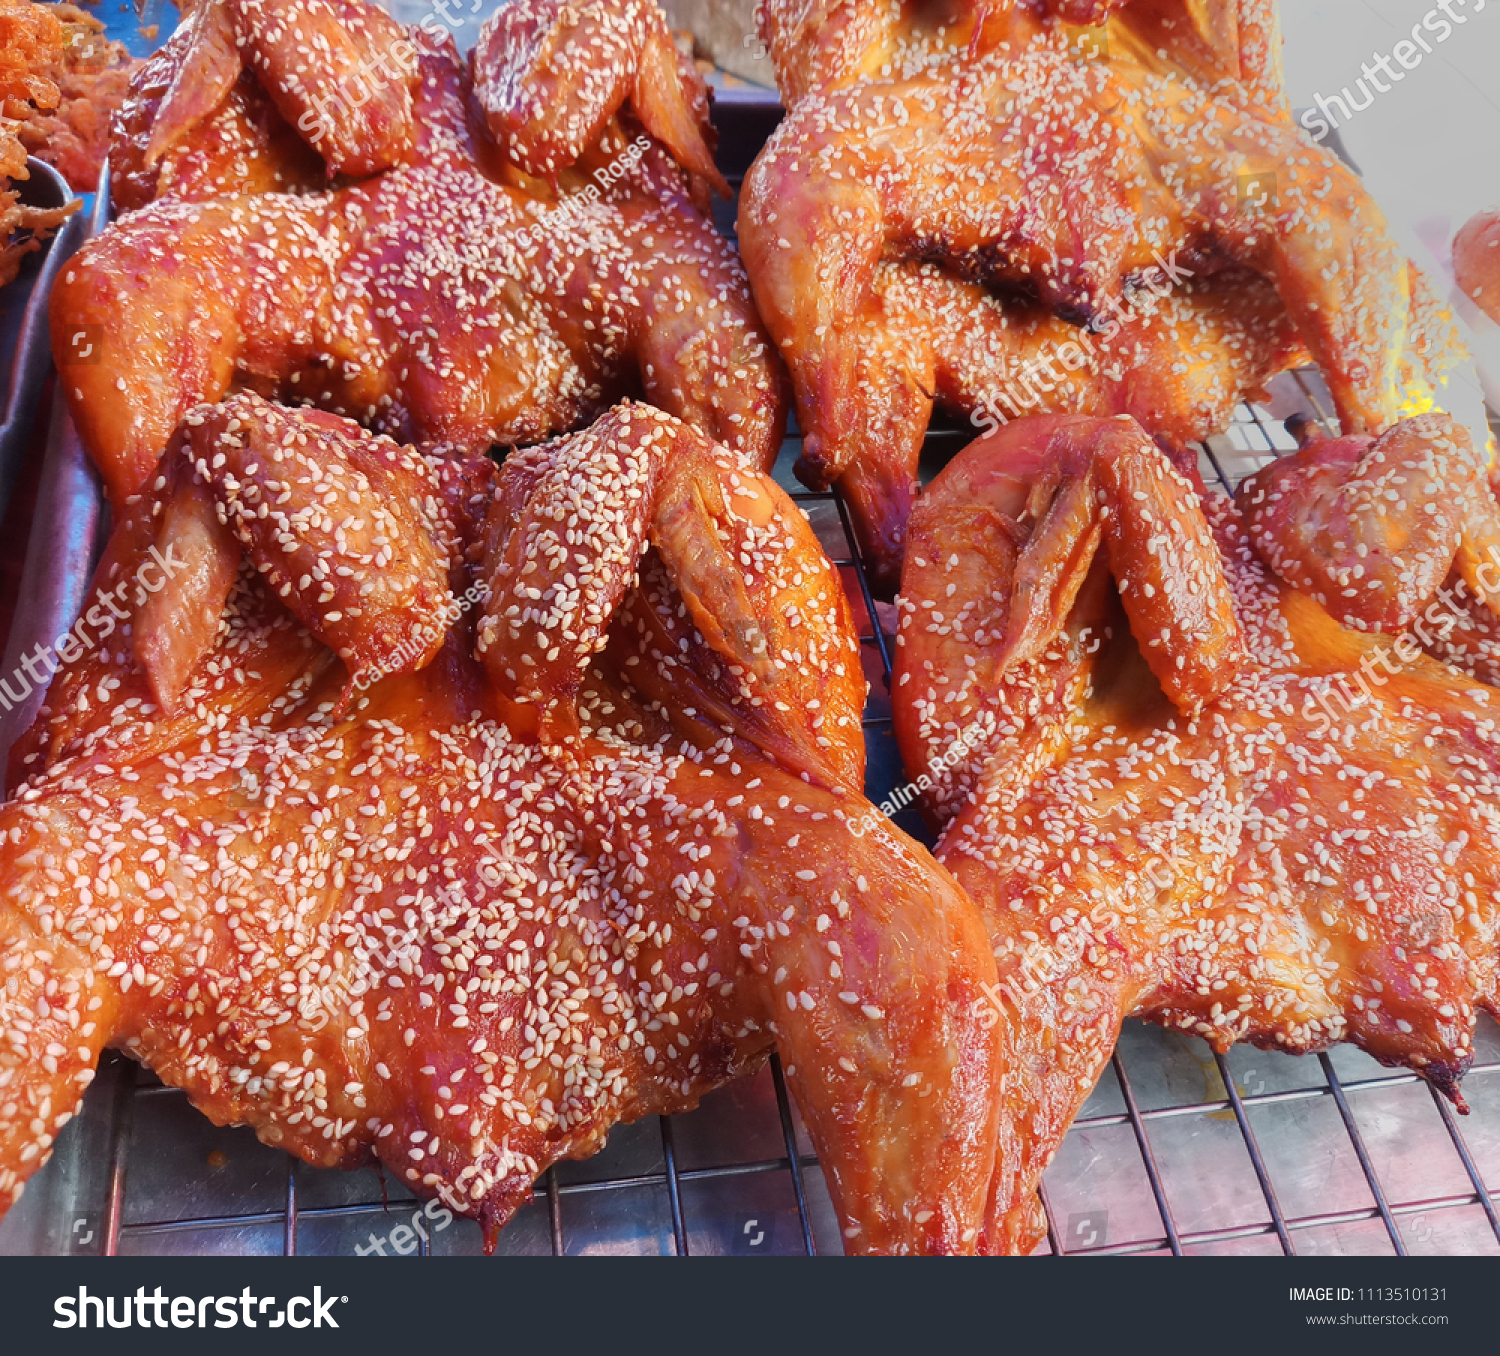 Grilled Chicken White Sesame Street Food Stock Photo Edit Now 1113510131